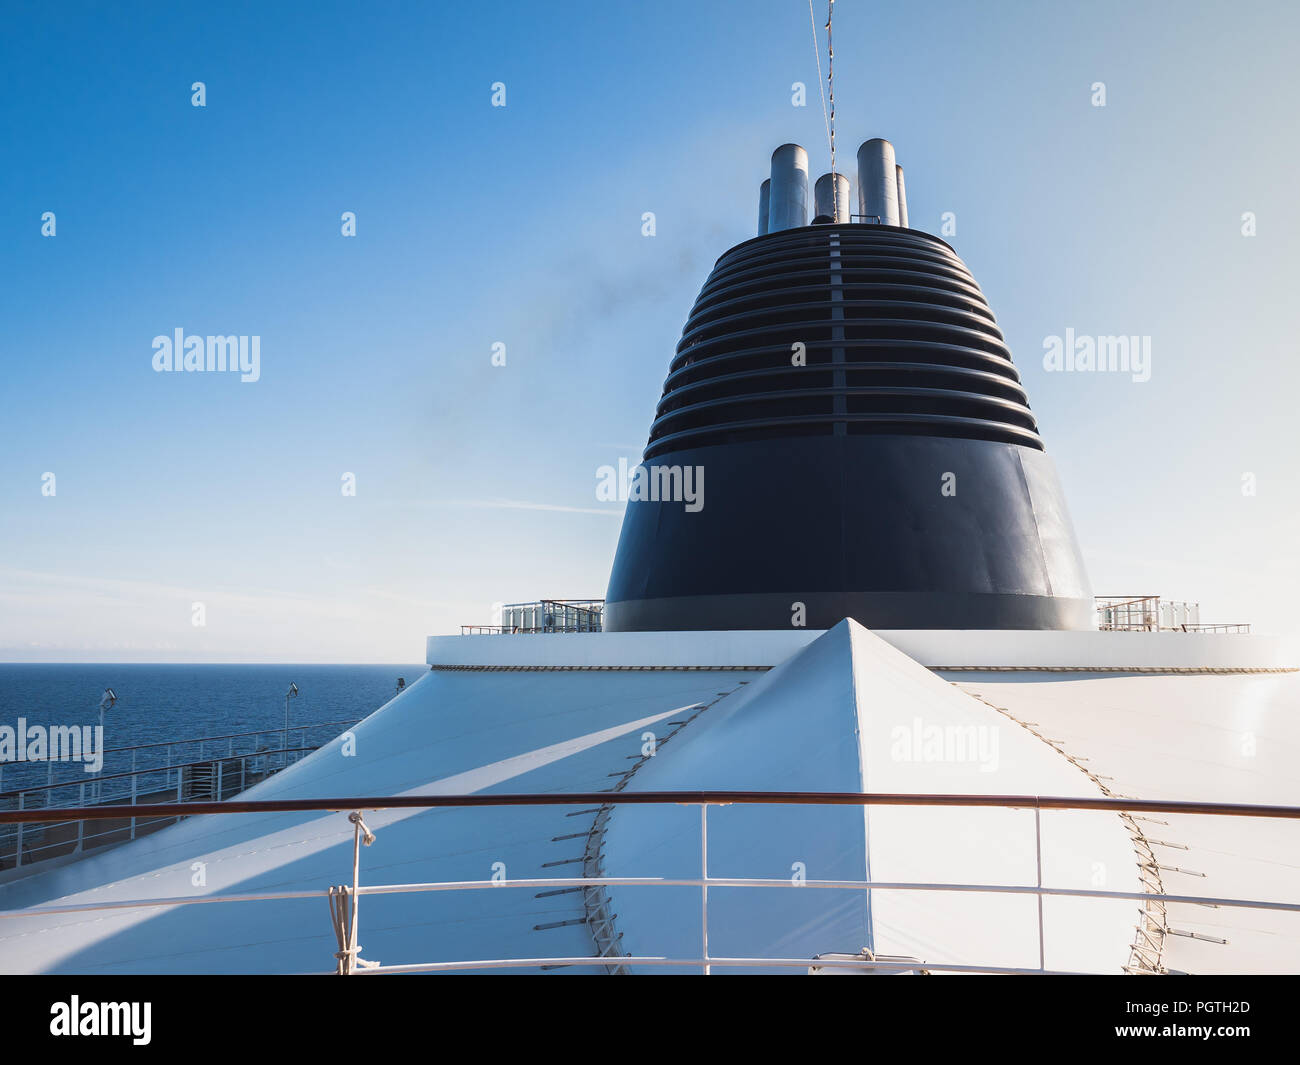 Cruise liner on the background of the coastline and clear blue sky Stock Photo